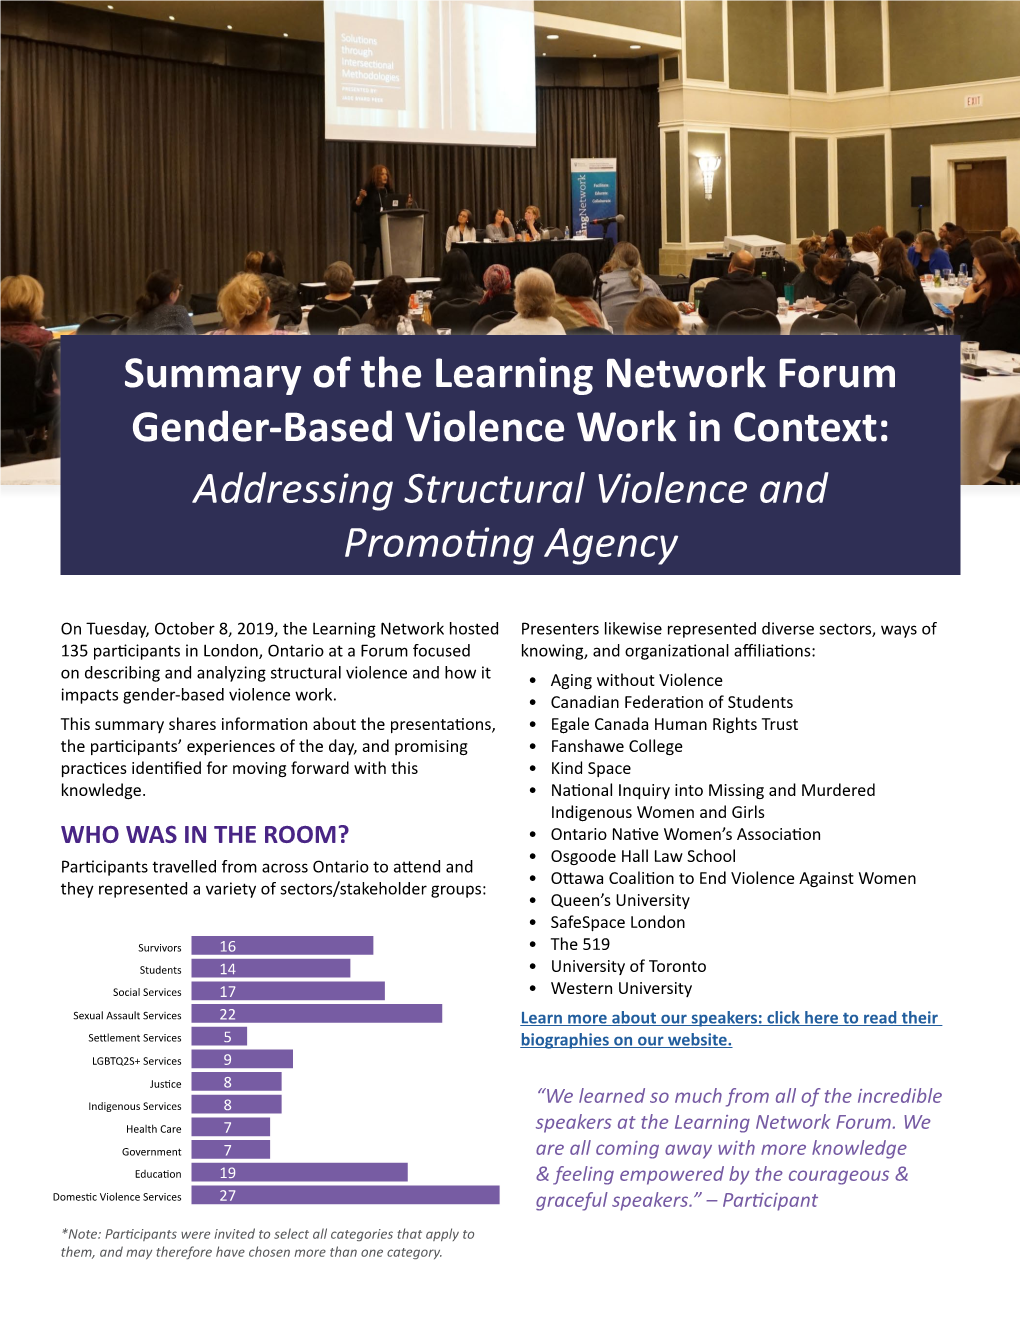 Summary of the Learning Network Forum Gender-Based Violence Work in Context: Addressing Structural Violence and Promofing Agenc